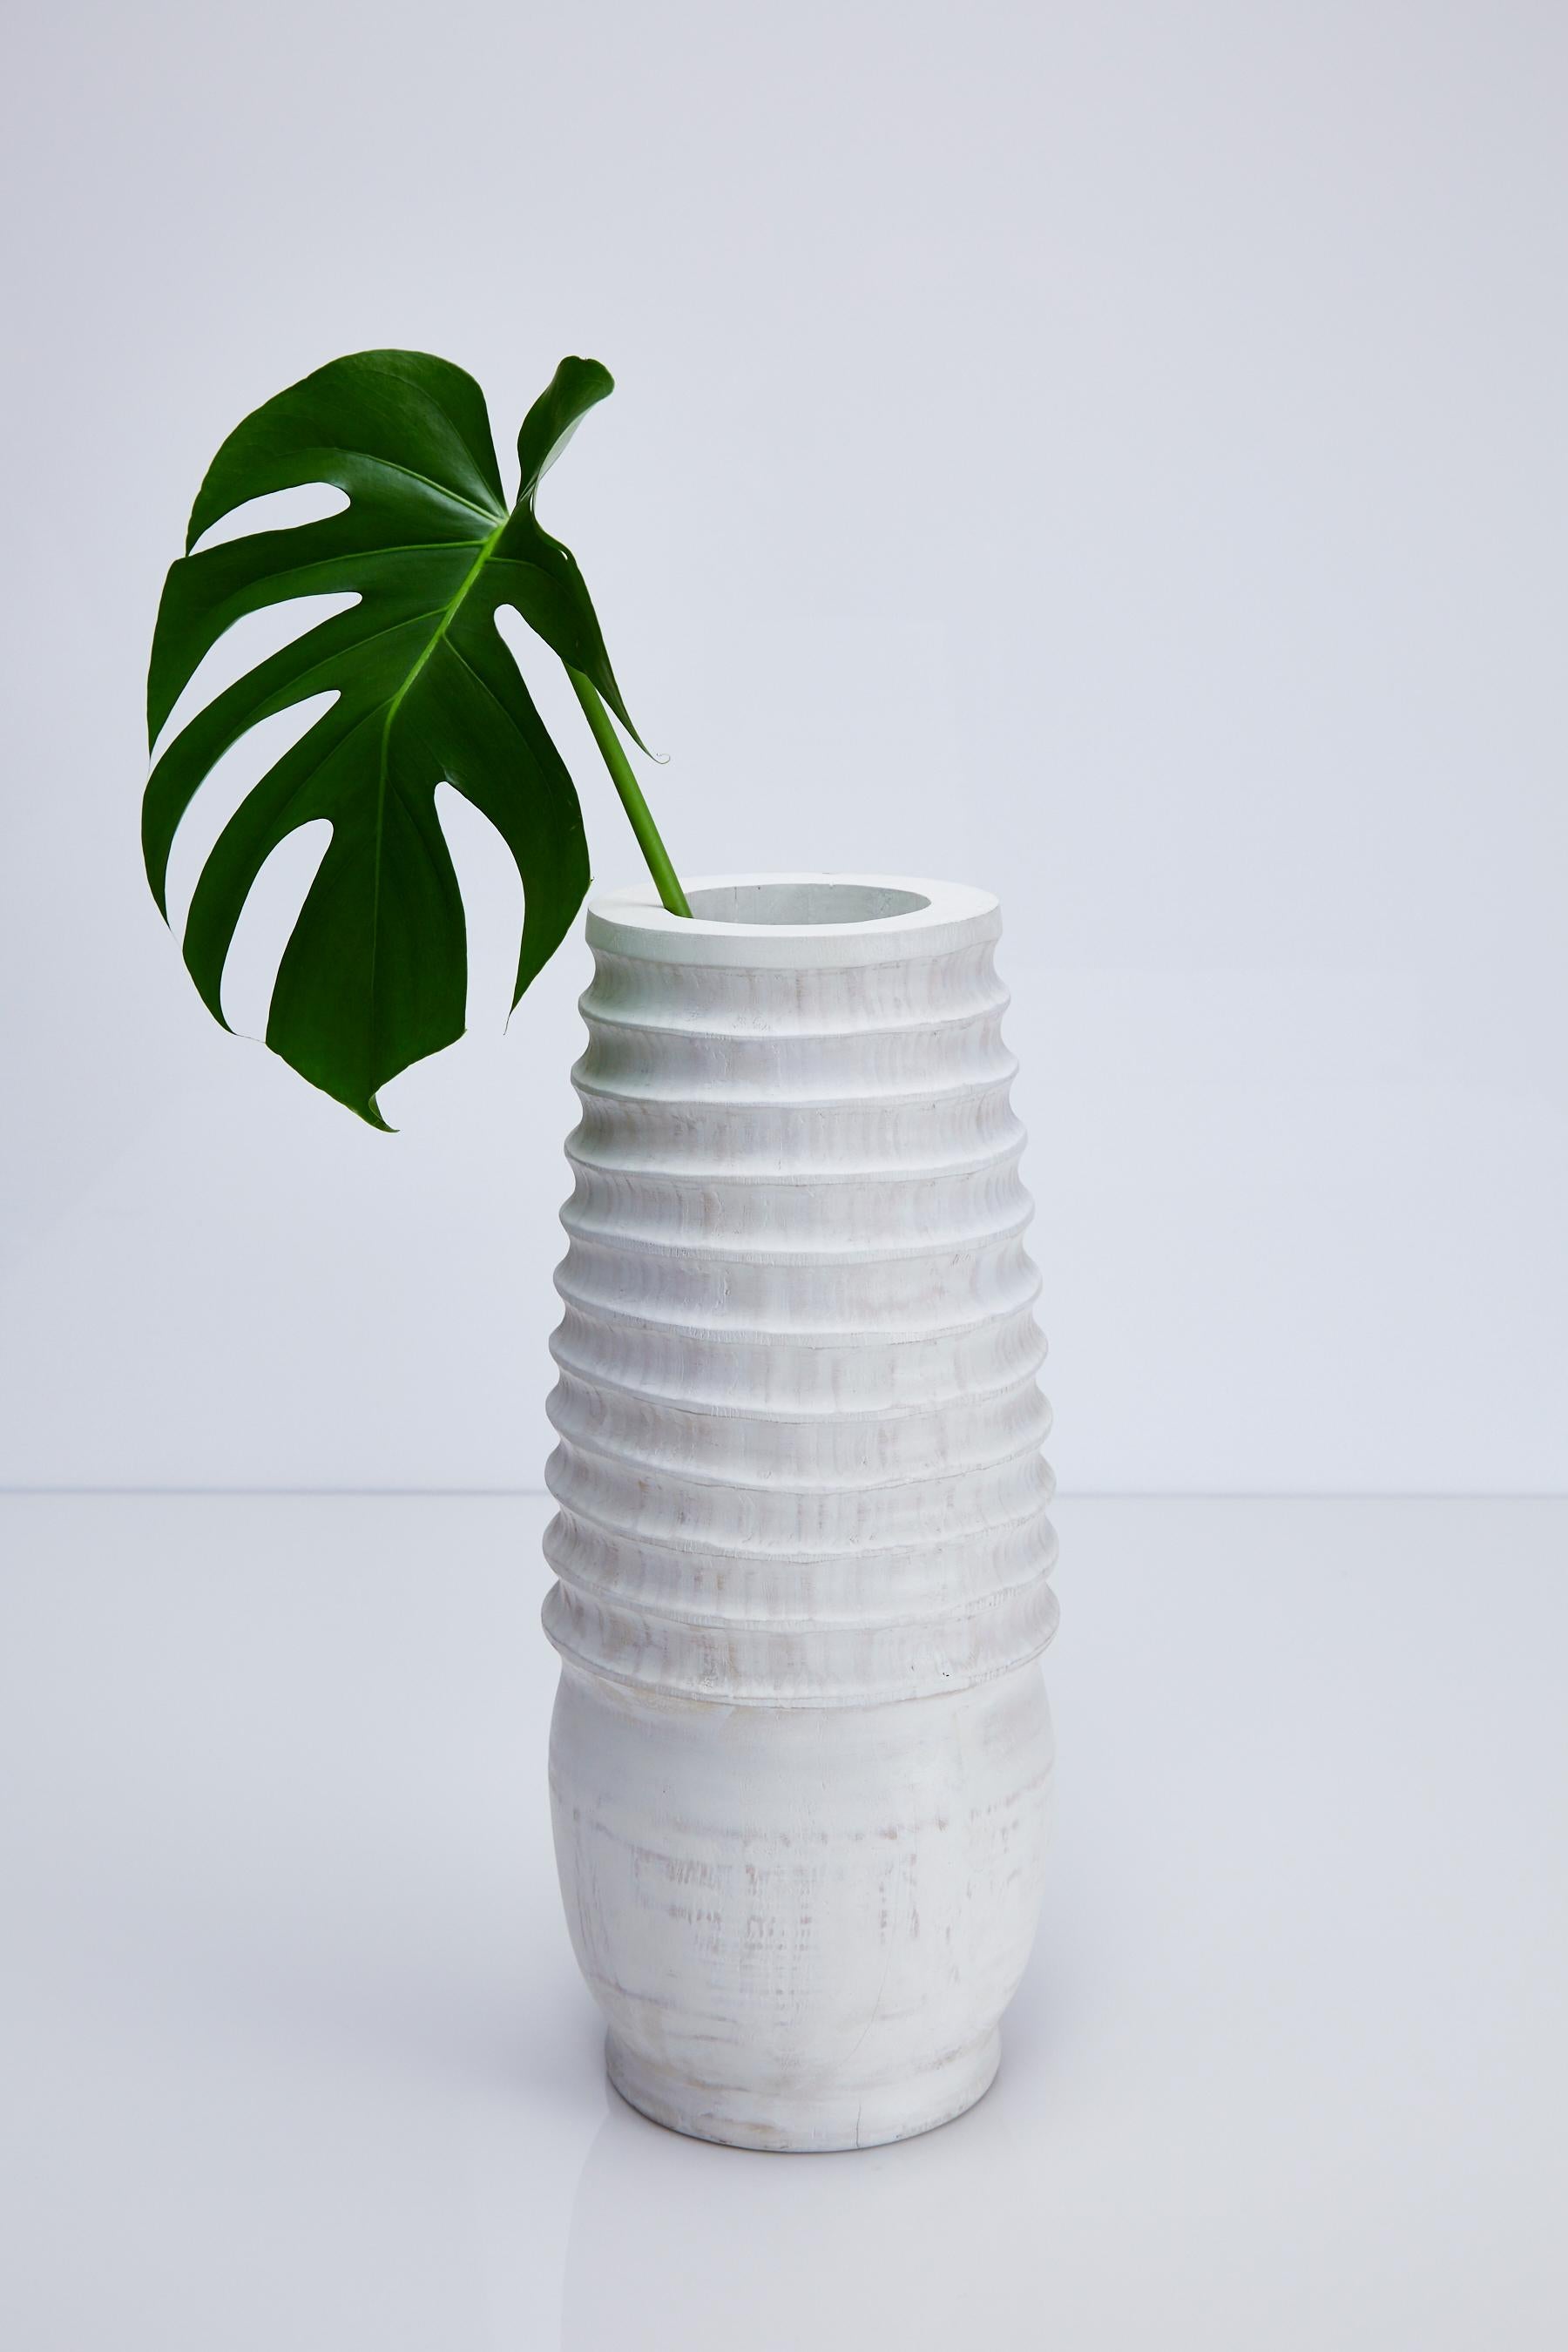 Medium sized hand carved wooden vase with ribbing extending 3/4 of the way down the body. Vase has distressed white-washed finish.